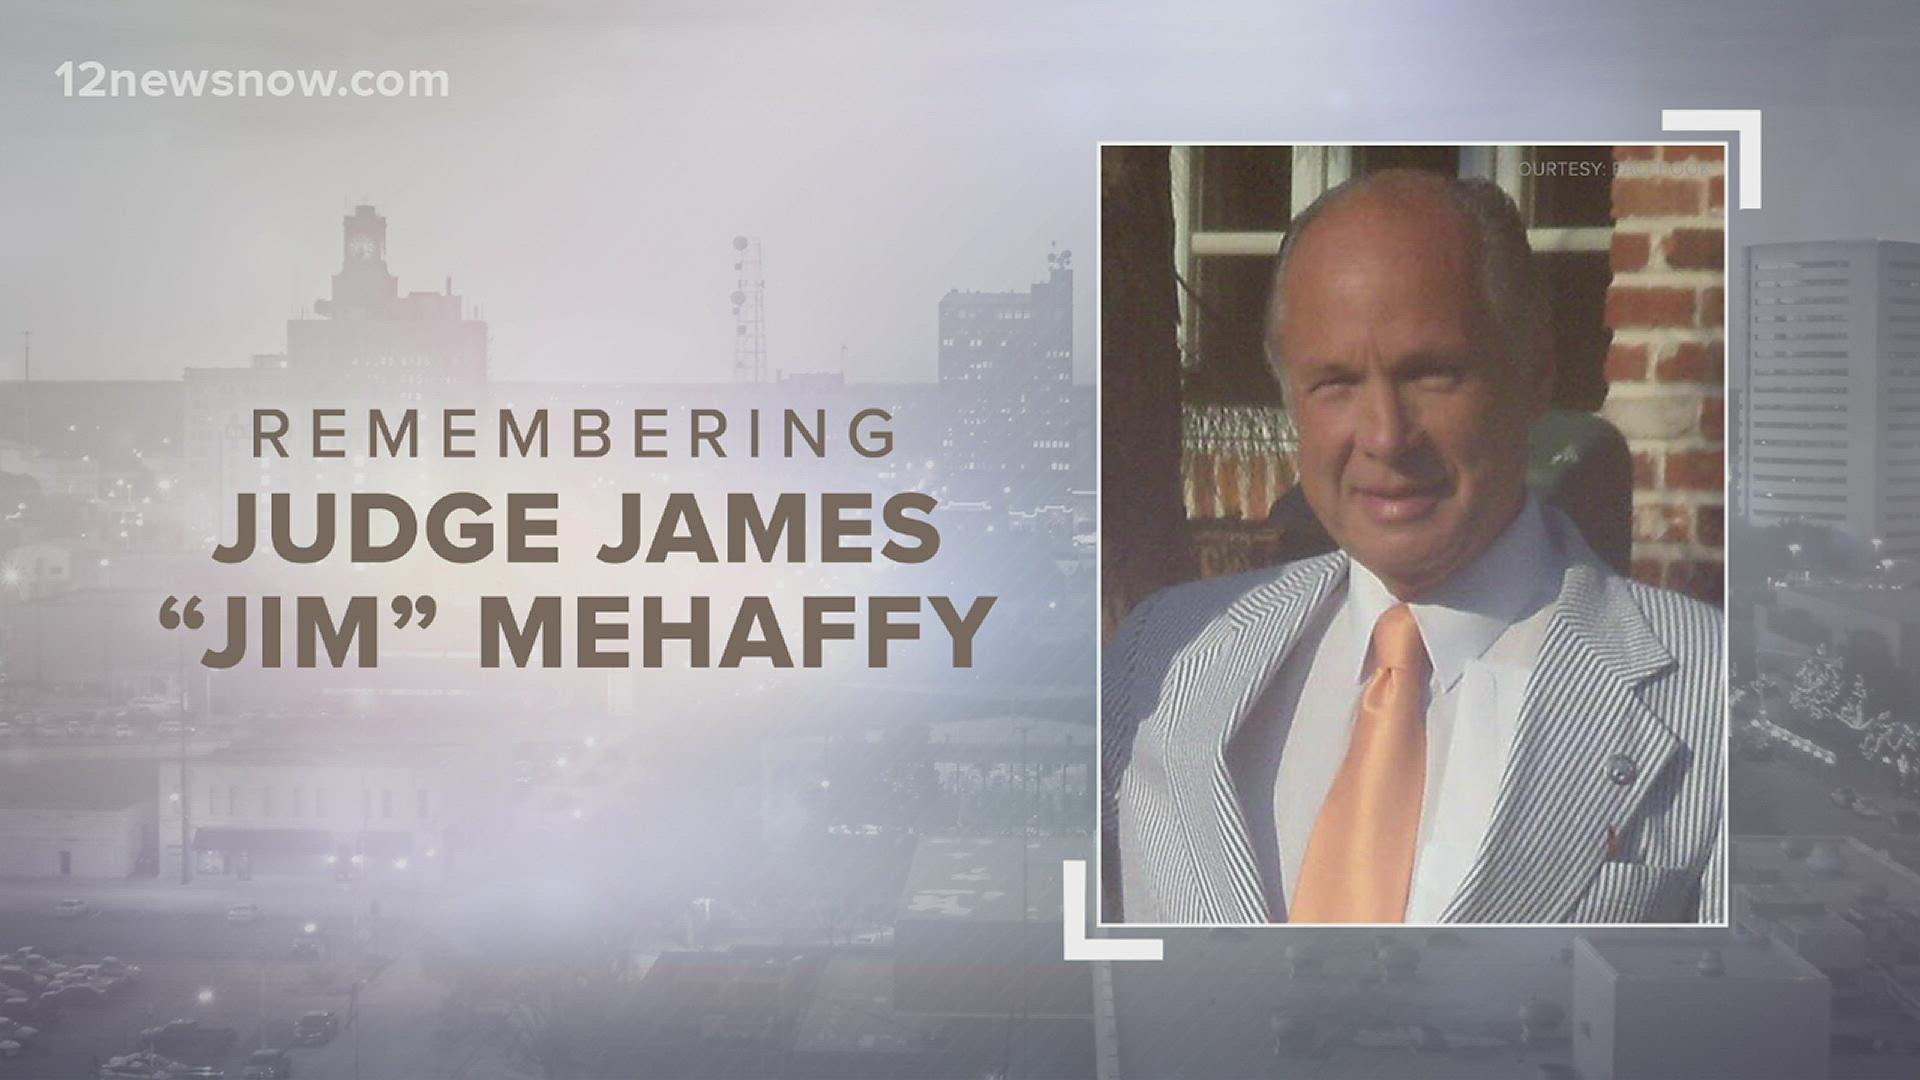 The legal community remembers Mehaffy as a kind man.